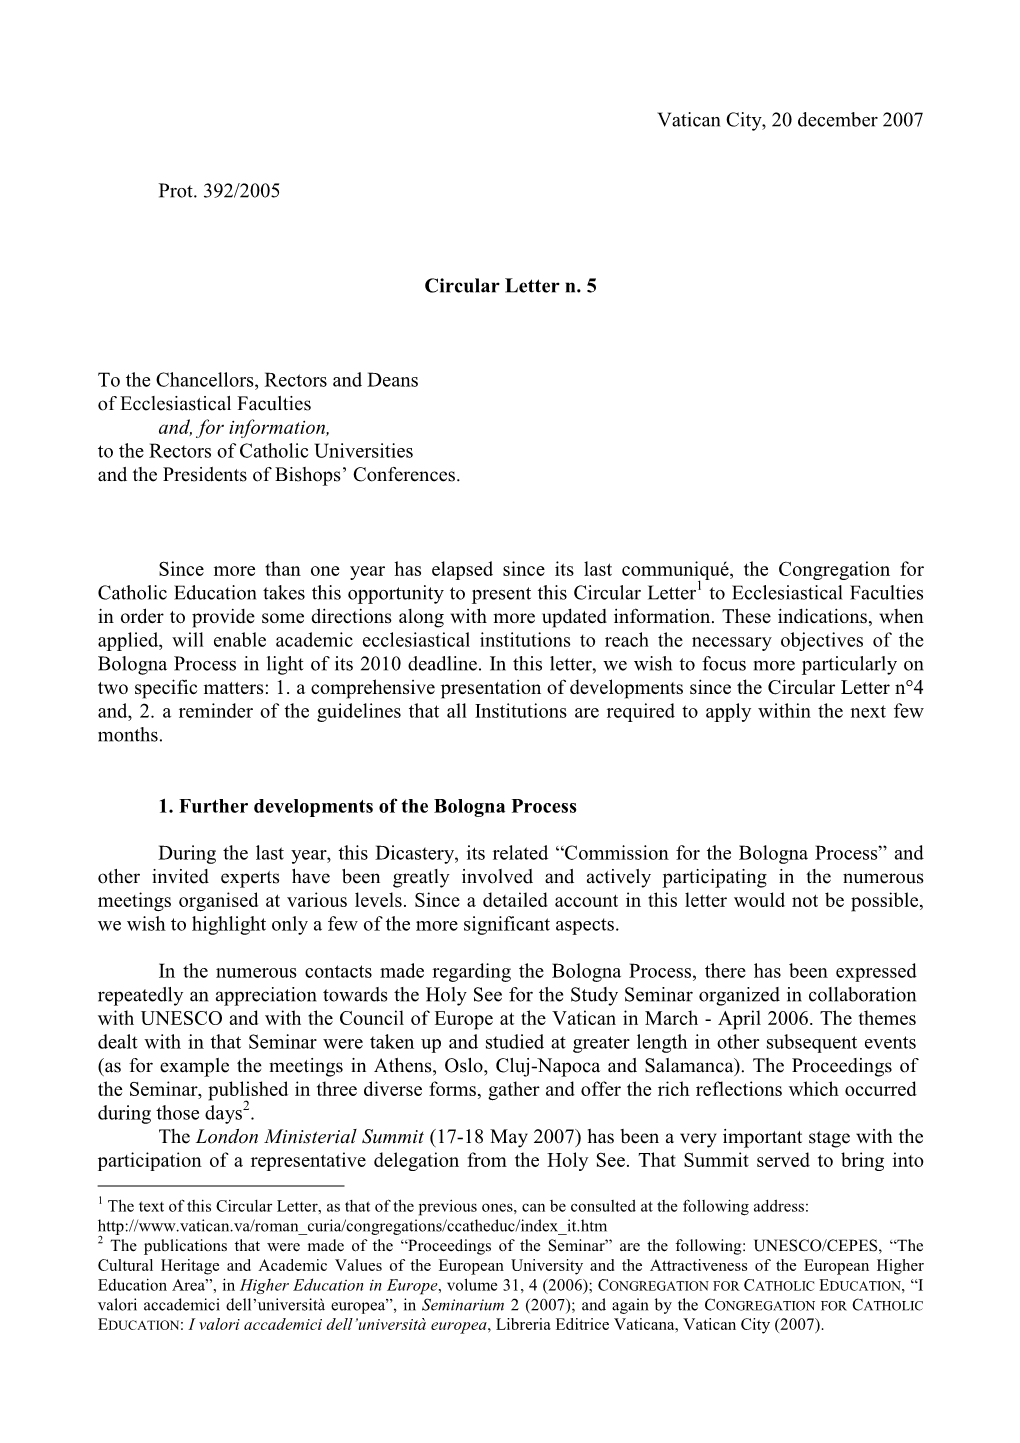 Vatican City, 20 December 2007 Prot. 392/2005 Circular Letter N. 5 to The